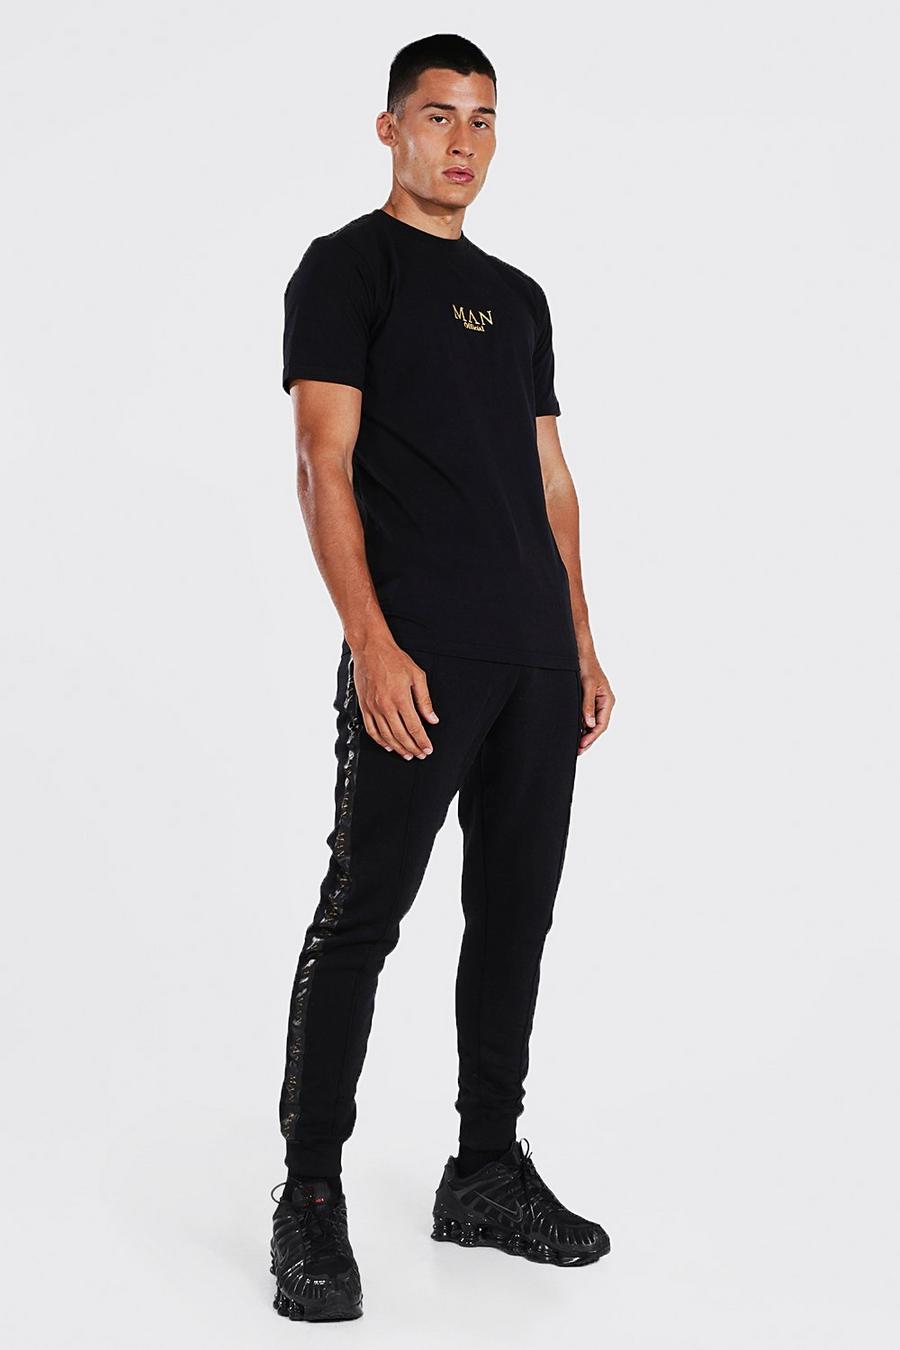 Black noir Man Gold Taped T-Shirt And Pintuck Joggers Set image number 1